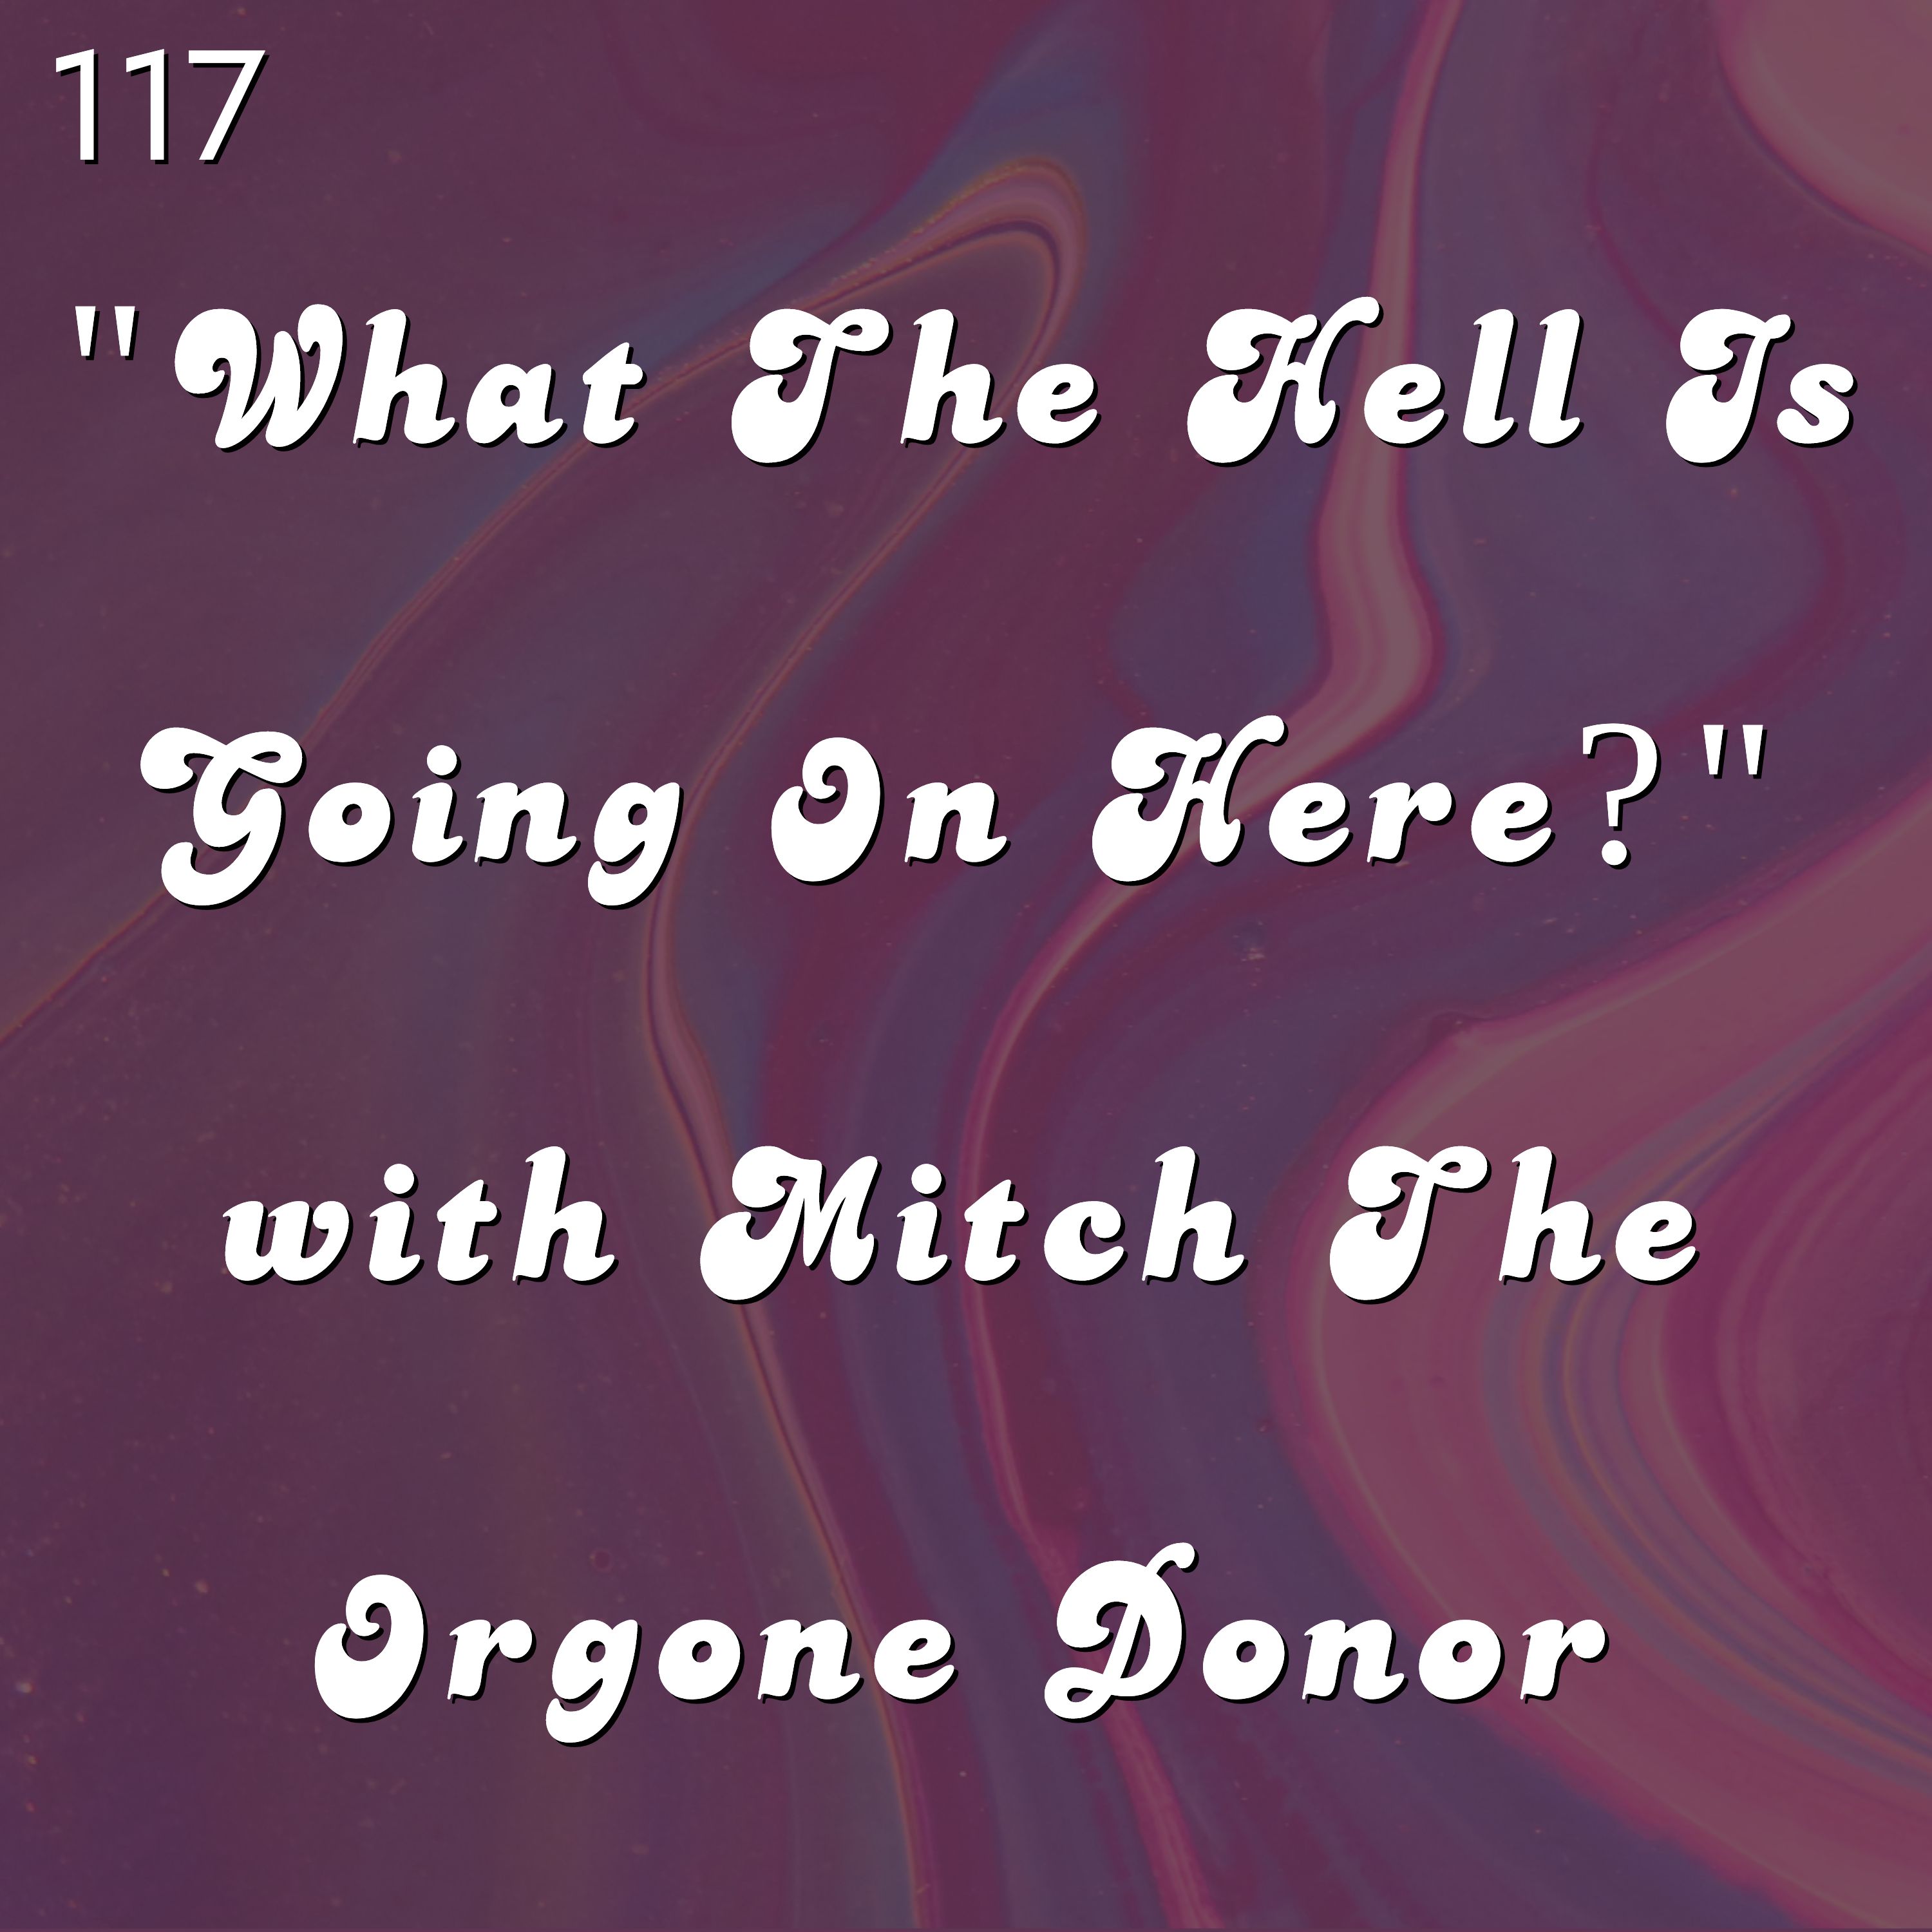 #117 - "What The Hell Is Going On Here?" with Mitch The Orgone Donor